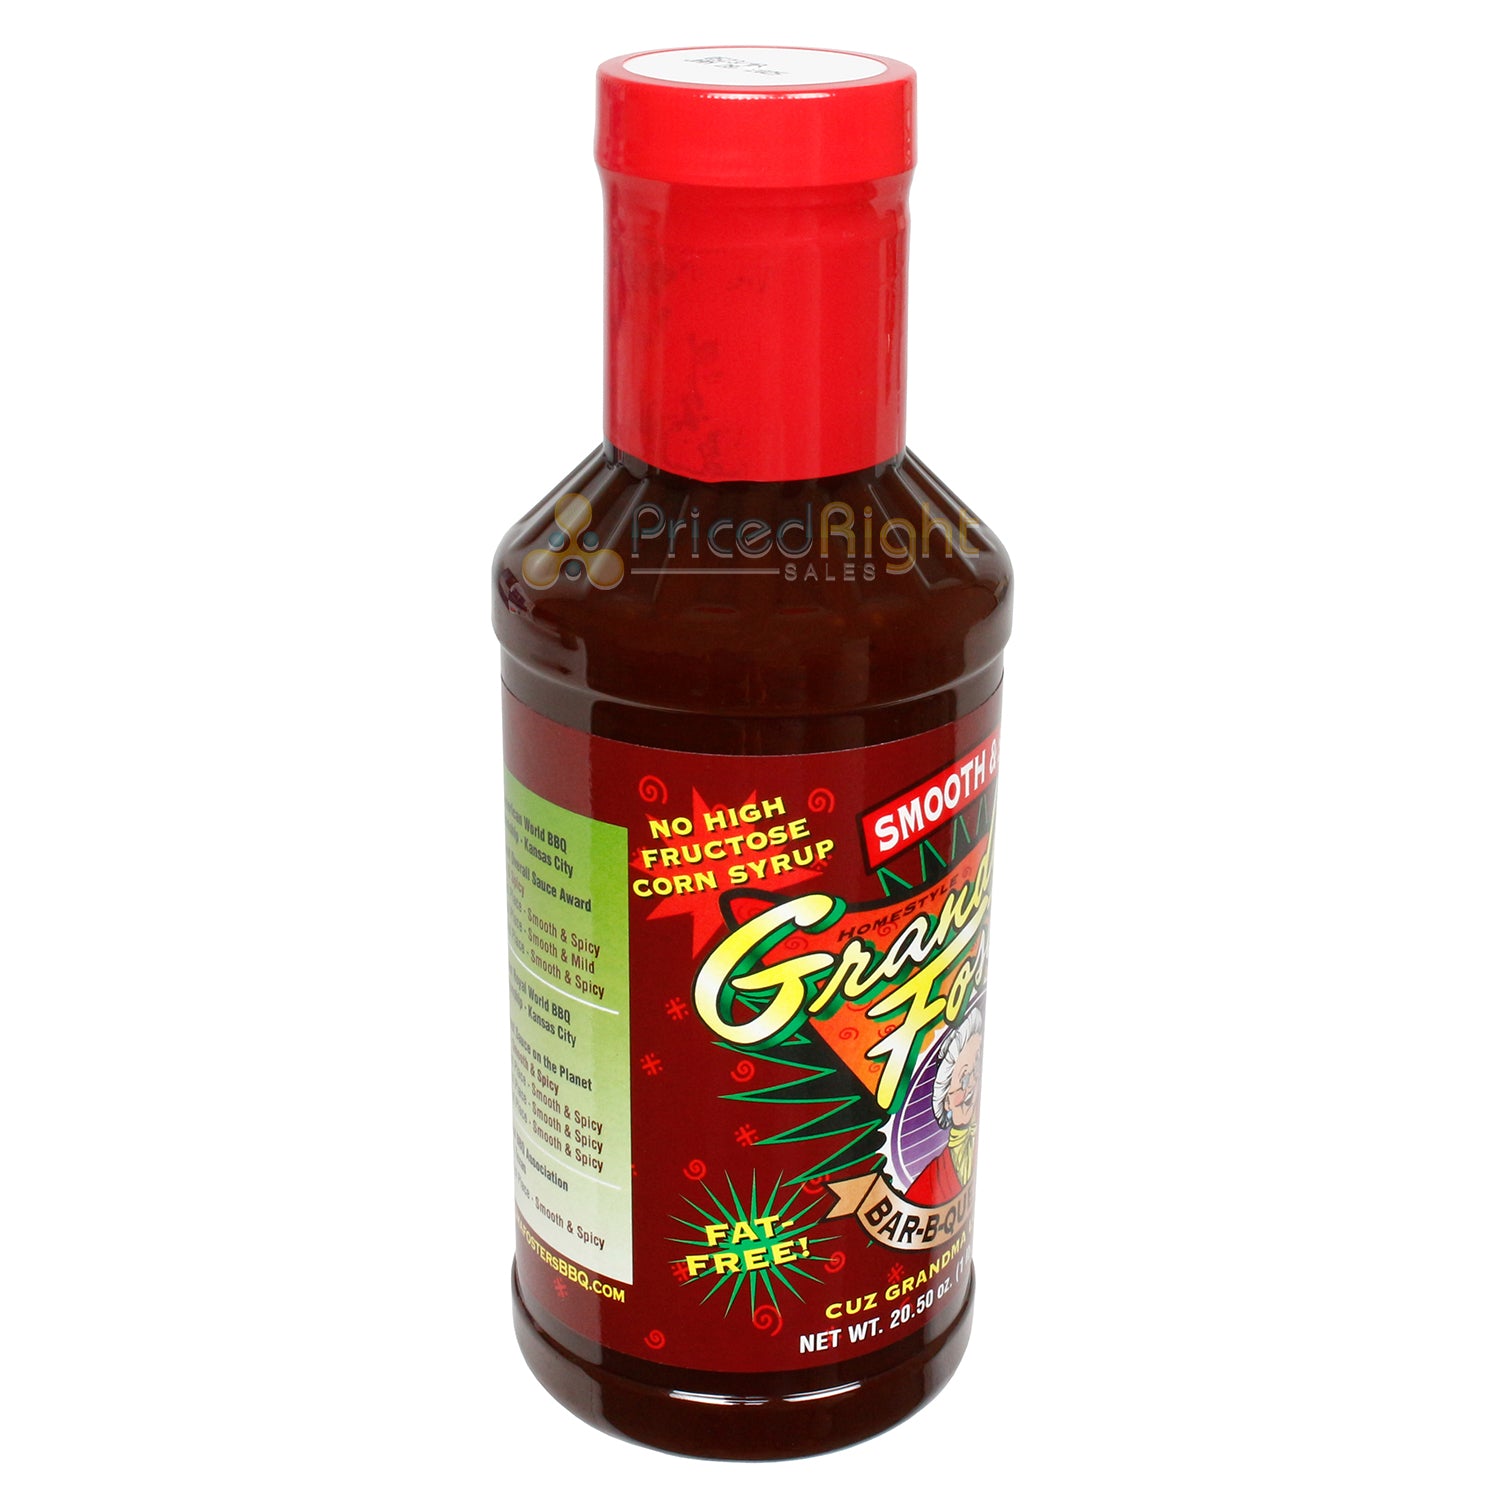 Grandma Foster's Homestyle Smooth and Spicy Bar-B-Que Sauce Gluten Free 20.5 Oz